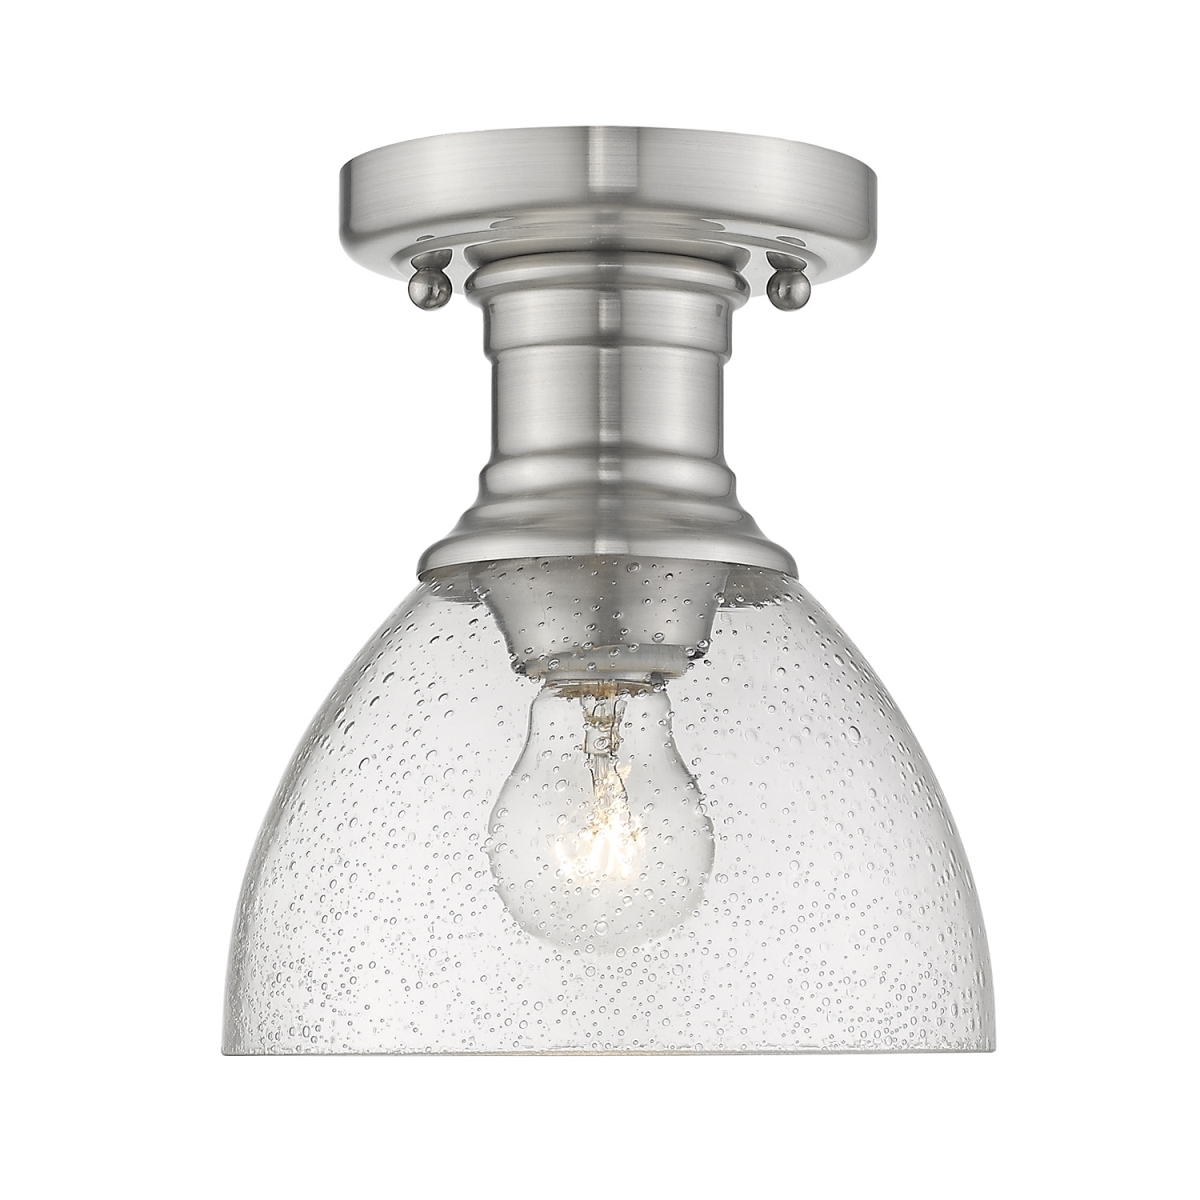 3118-sf Pw-sd Hines Semi-flush Mount Light With Seeded Glass, Pewter